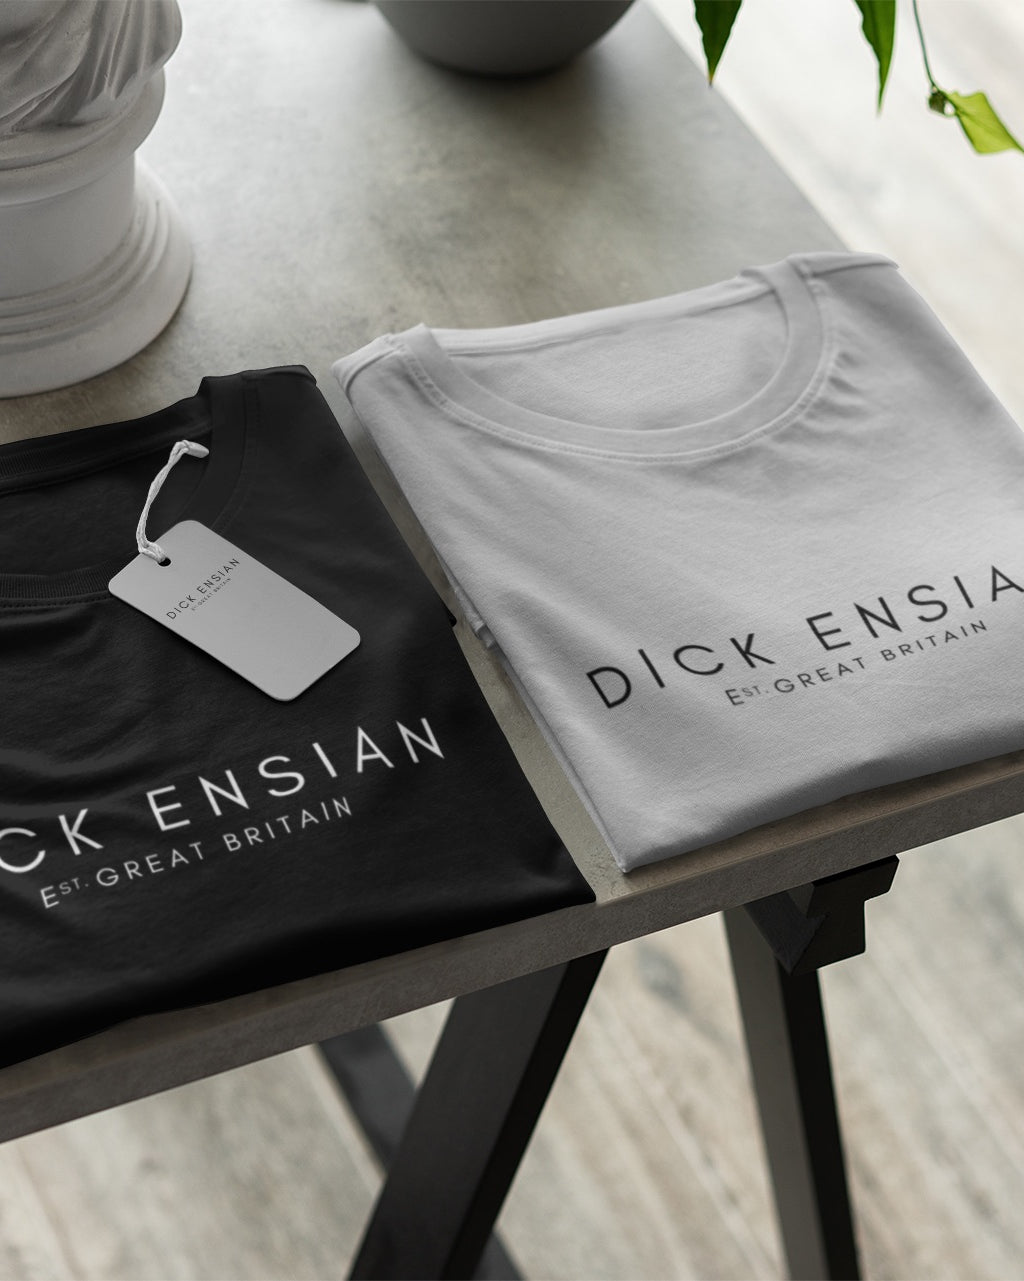 The Dick Ensian collection of clothes & gifts at Jolly & Goode